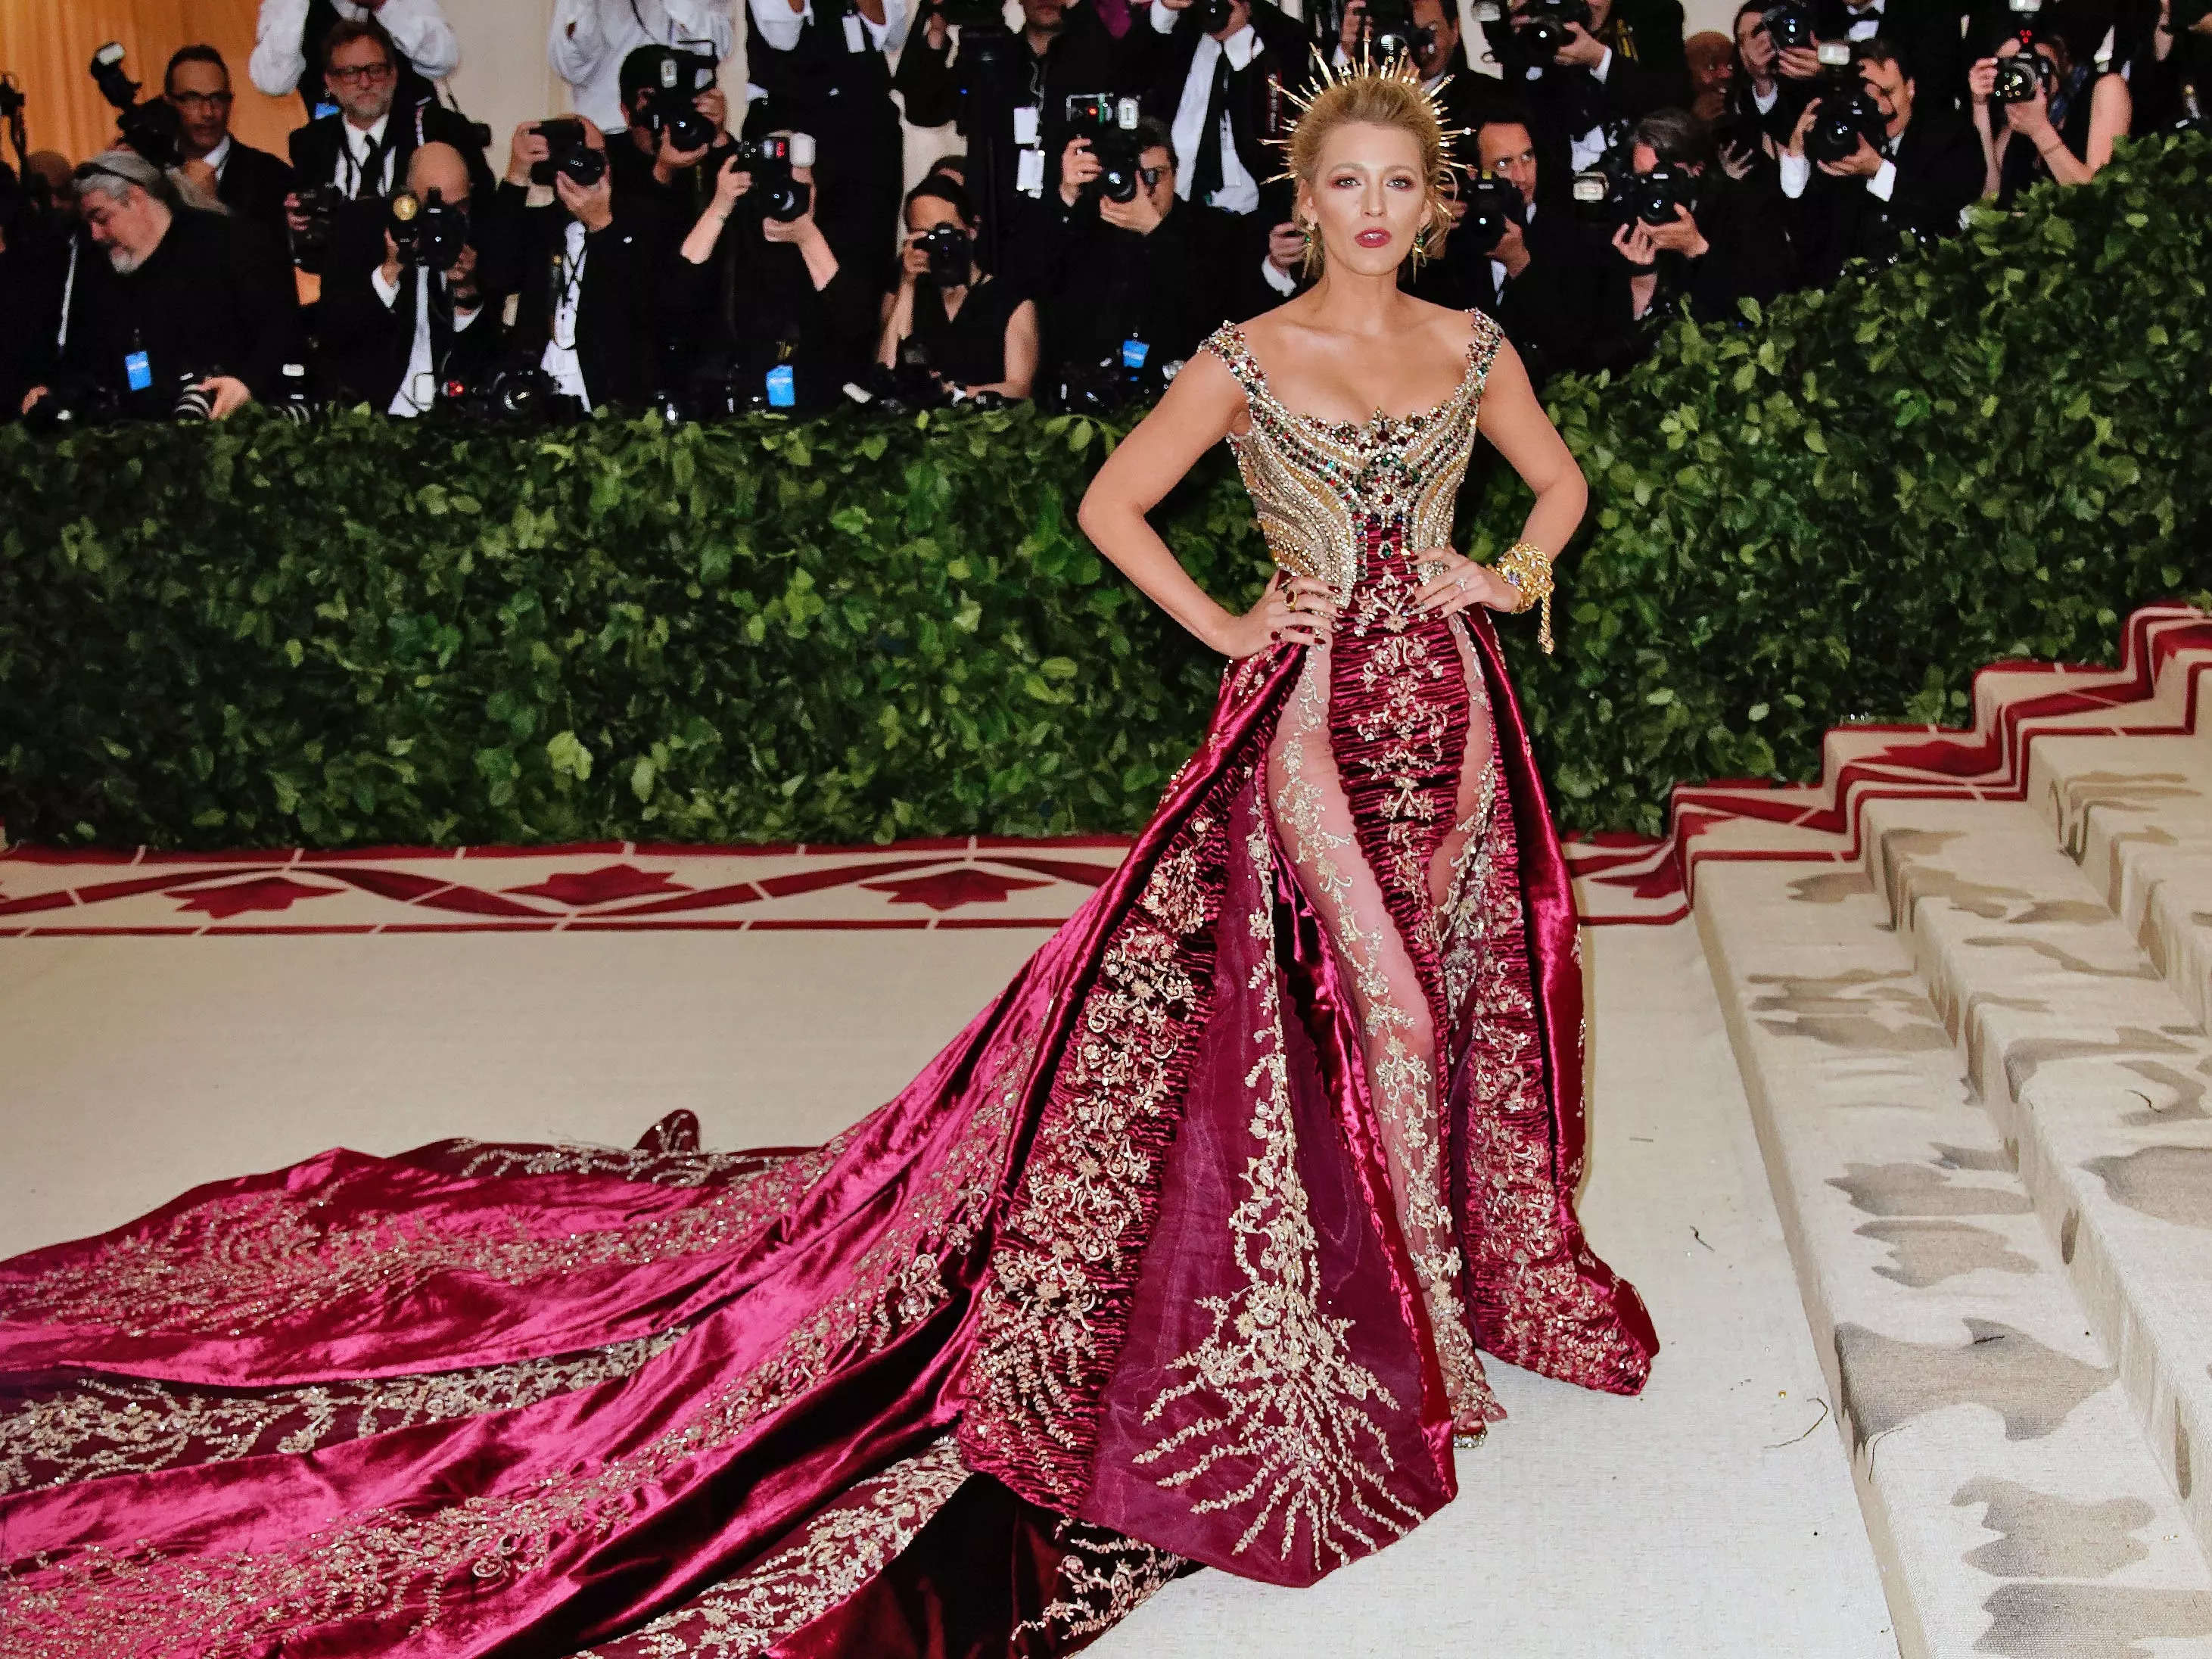 Met Gala 2022: See Looks from This Year's Gilded-Age Inspired